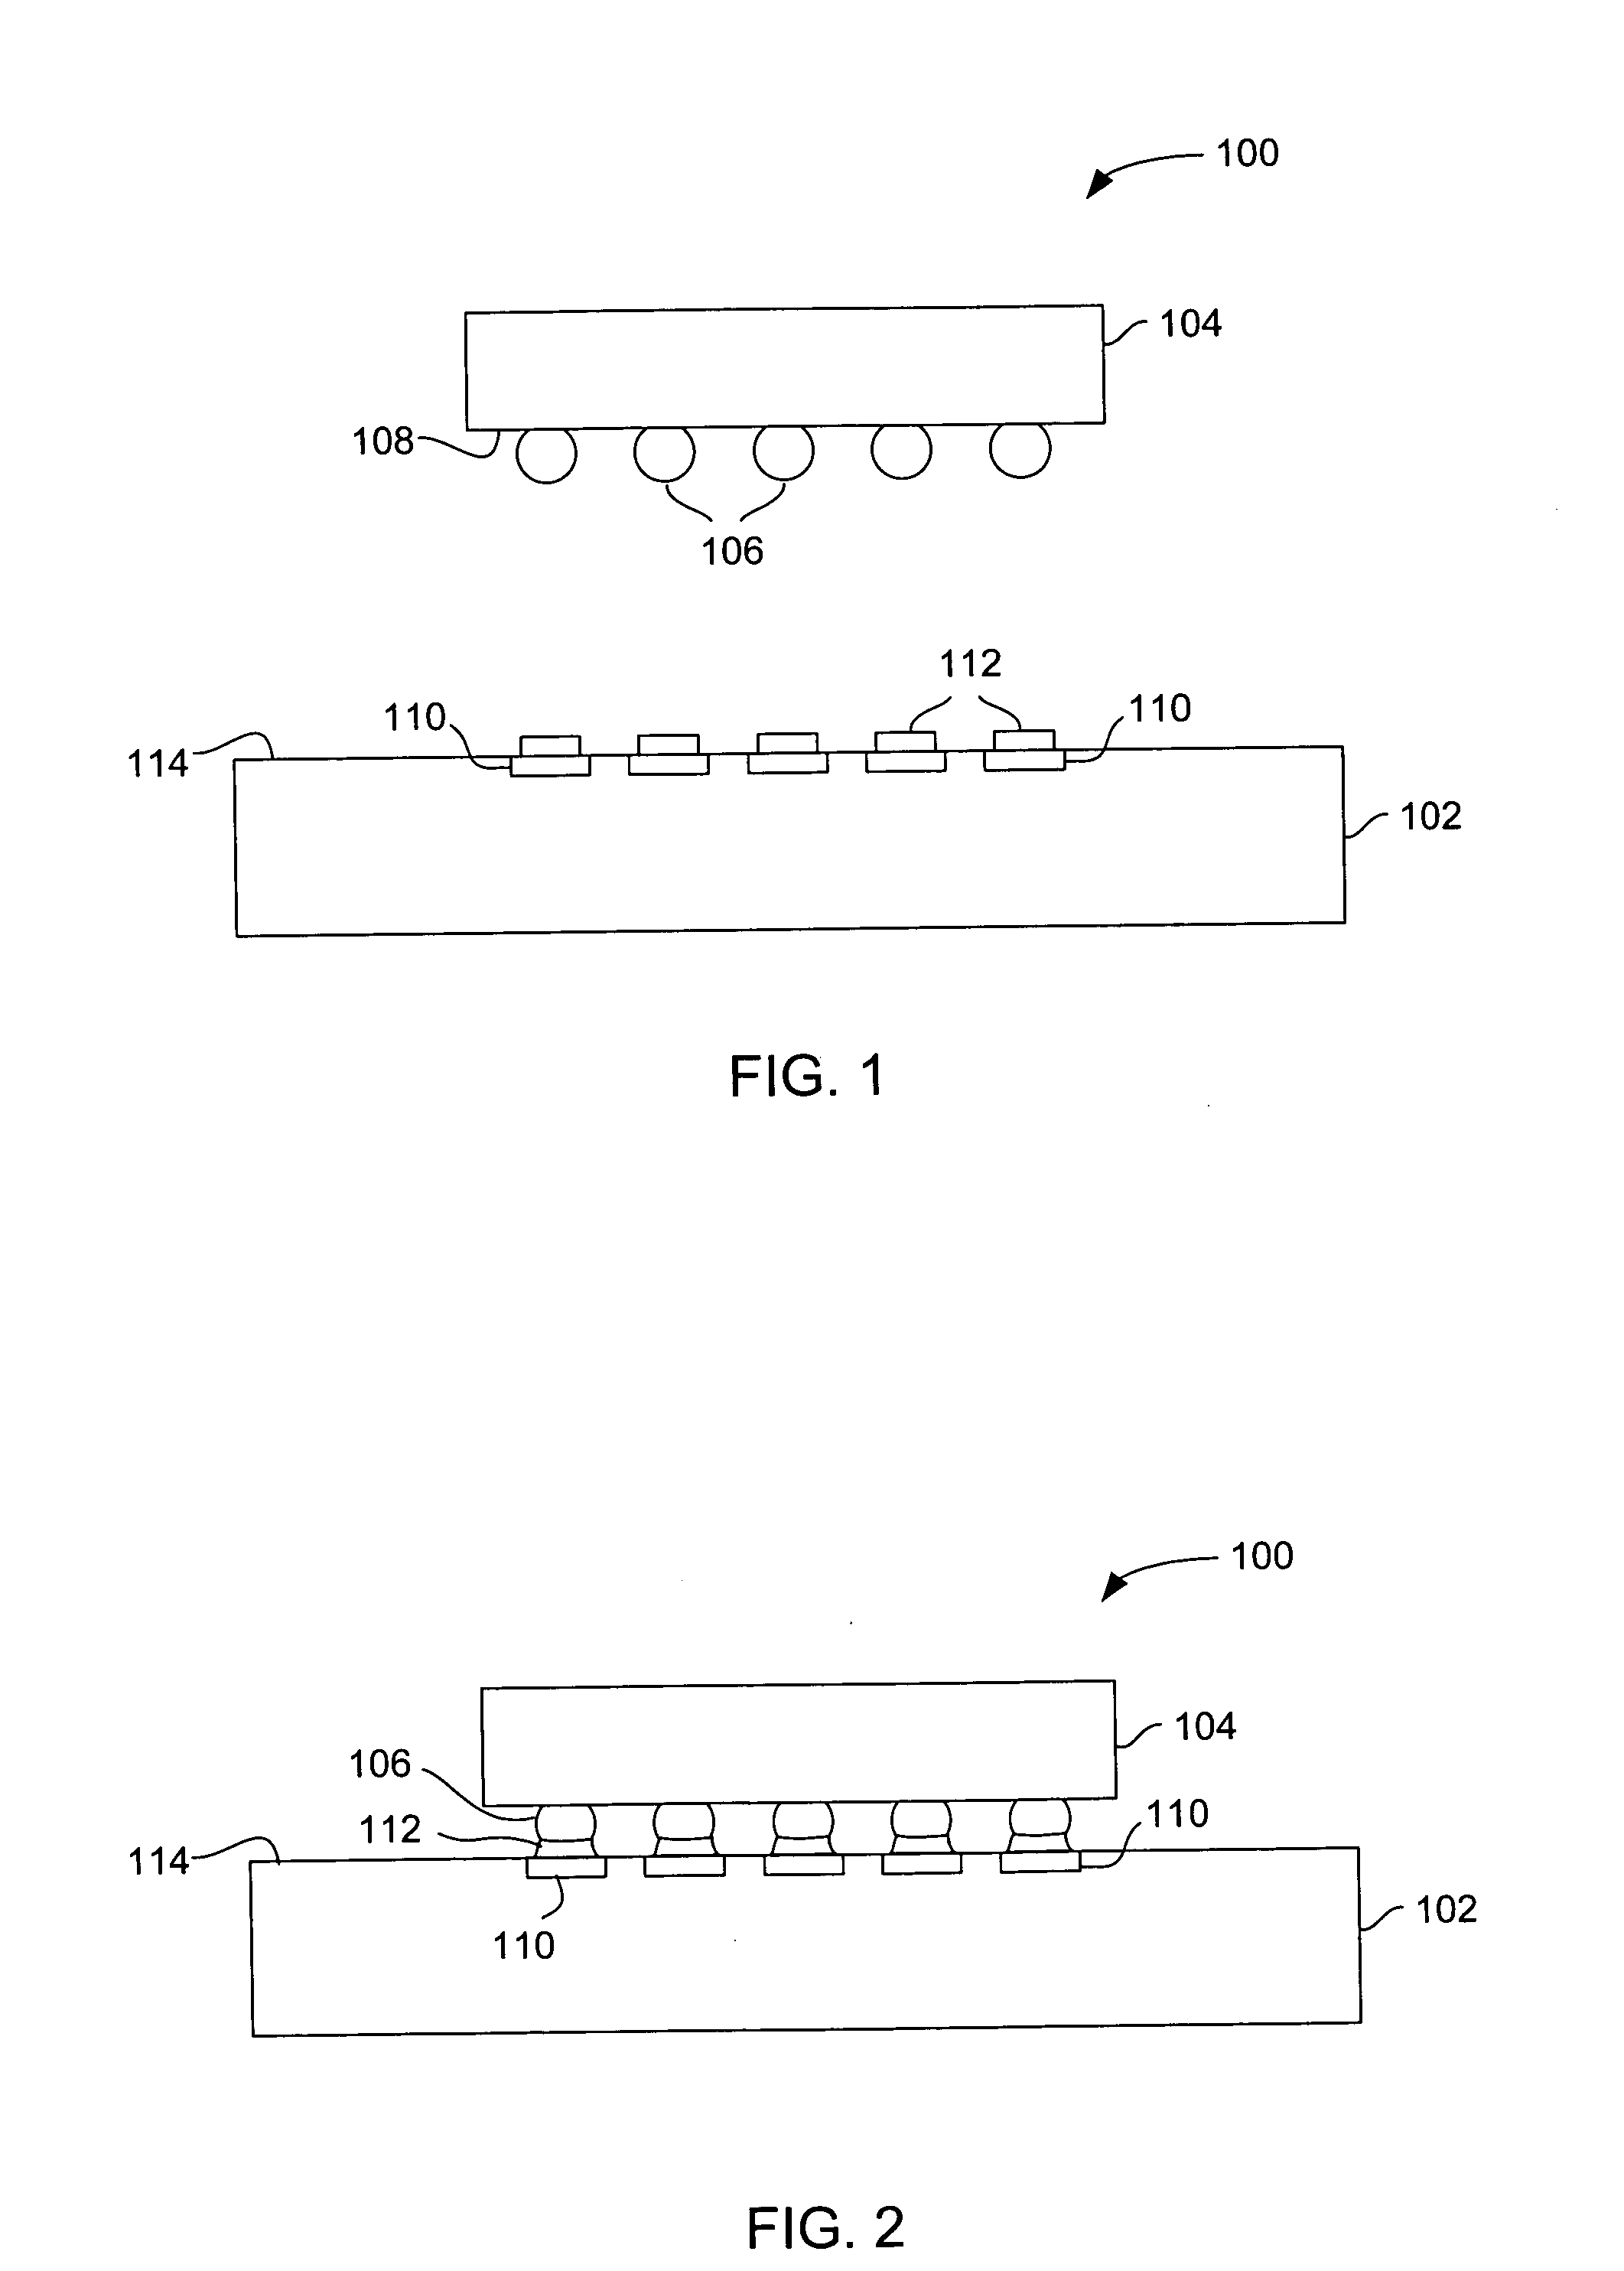 Low temperature PB-free processing for semiconductor devices